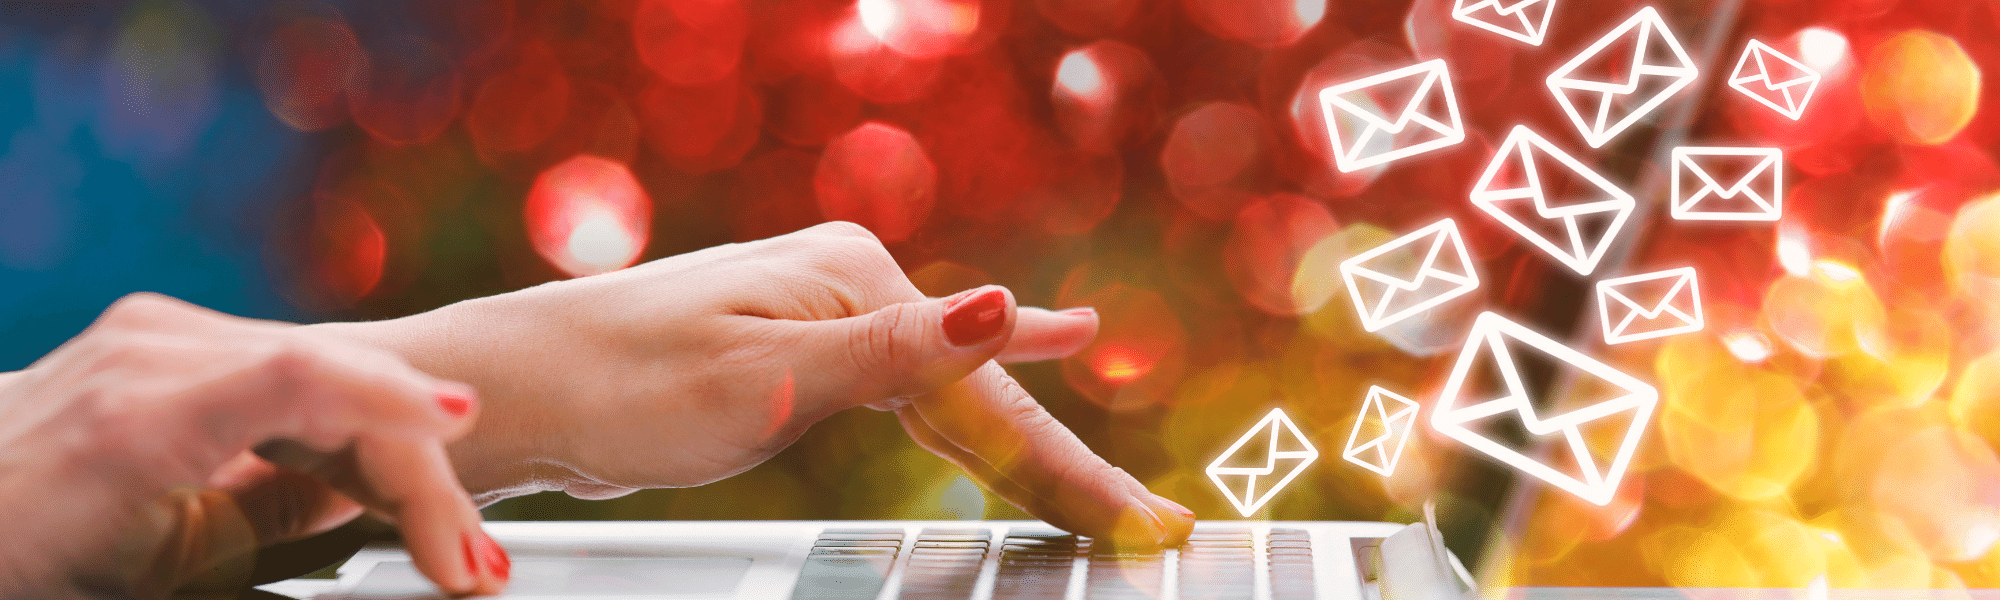 Getting back to the basics of email marketing